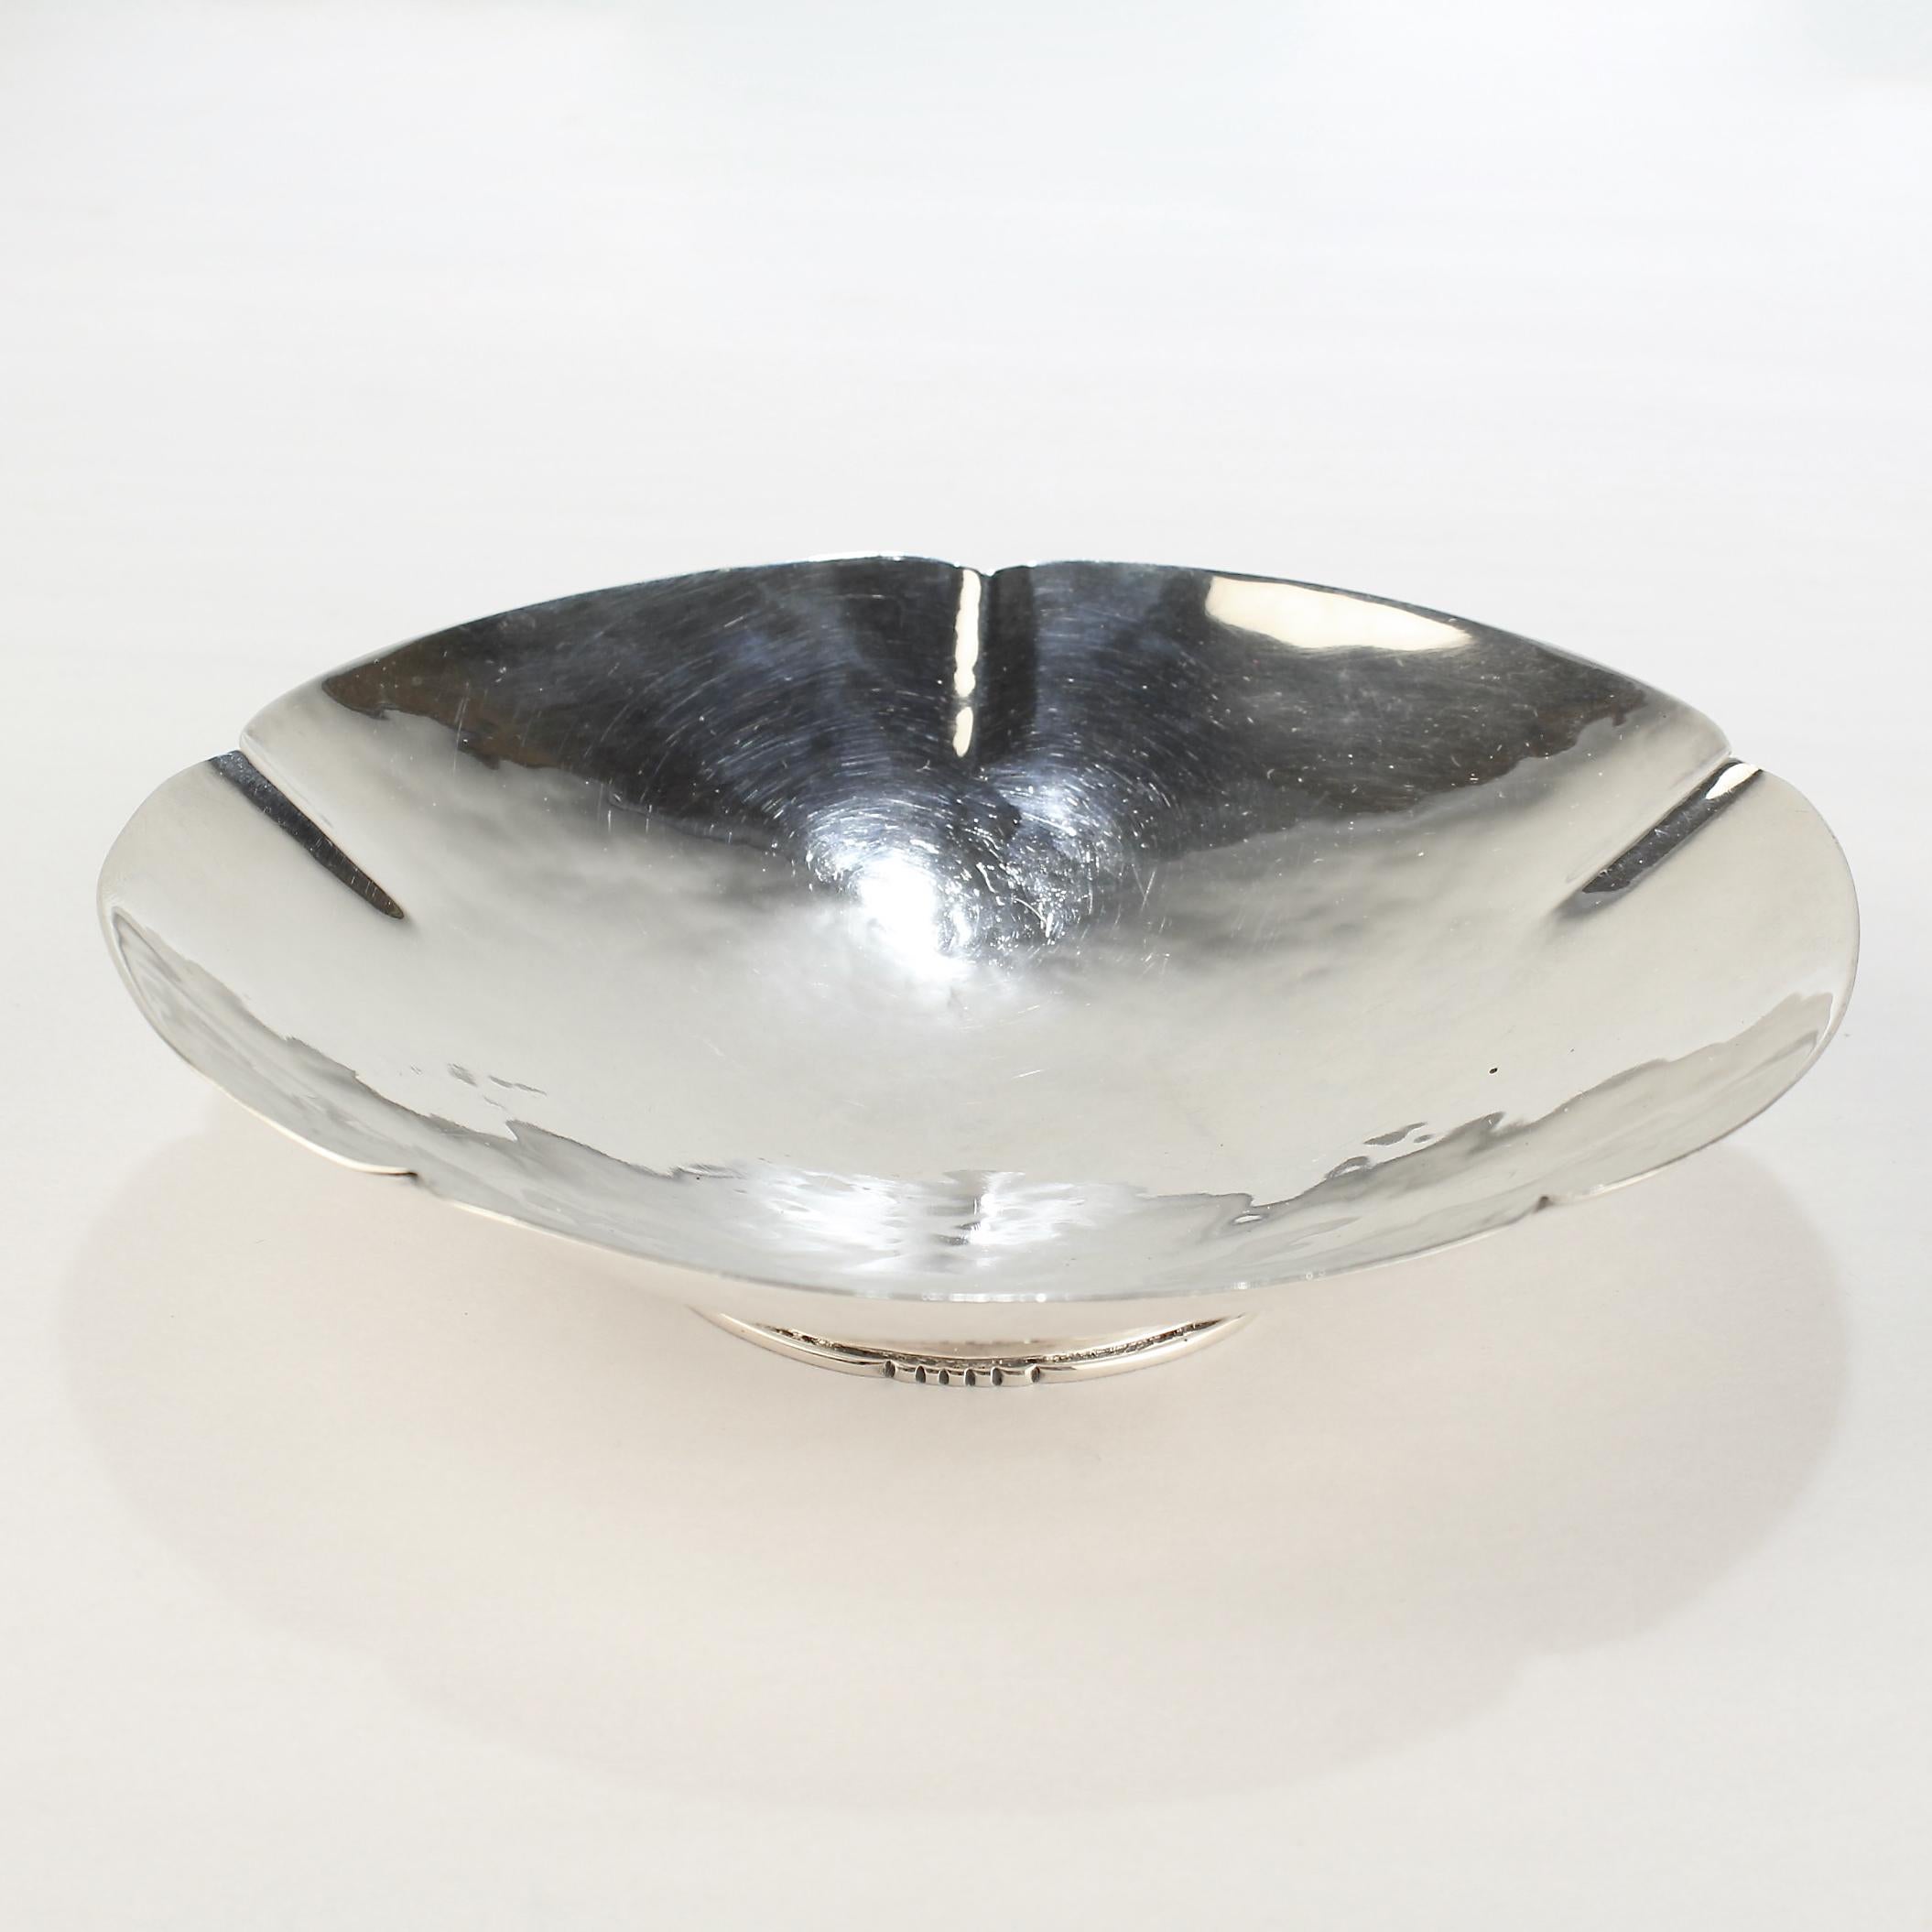 A fine hand-hammered Arts & Crafts footed dish or bowl. 

With a lobed-hand-hammered bowl mounted on a shaped foot. 

In sterling silver. 

Made by the American female silversmith Paula Wyman.

Simply a wonderful piece of American Arts & Crafts